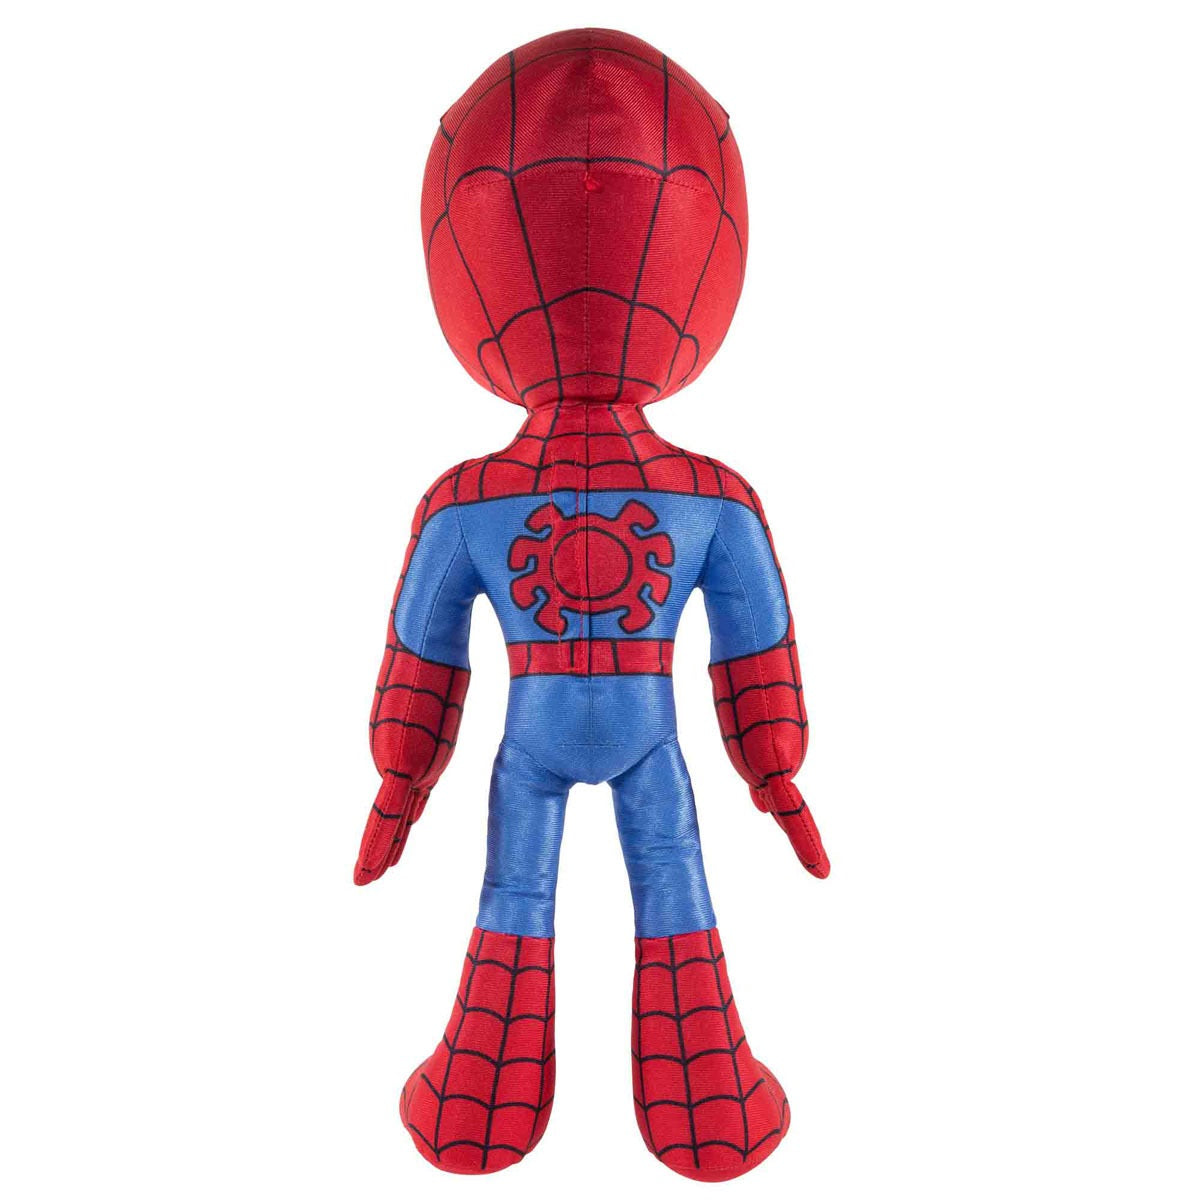 Marvel Spidey and his Amazing Friends: 16' Feature Plush My Friend Spidey